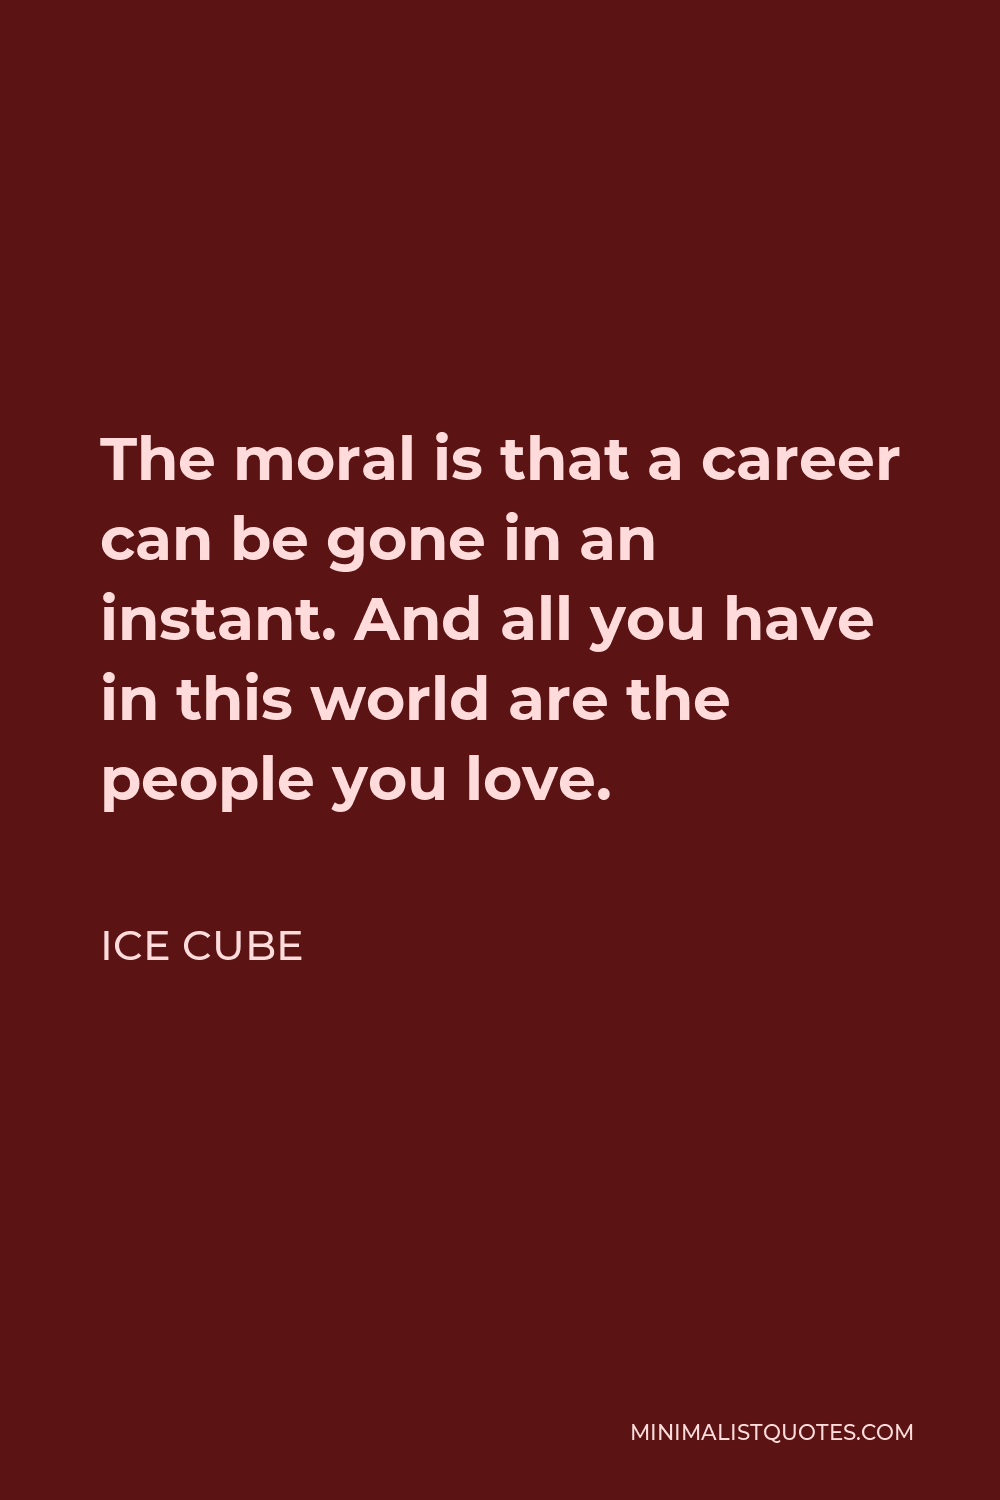 Ice Cube Quote - The moral is that a career can be gone in an instant. And all you have in this world are the people you love.